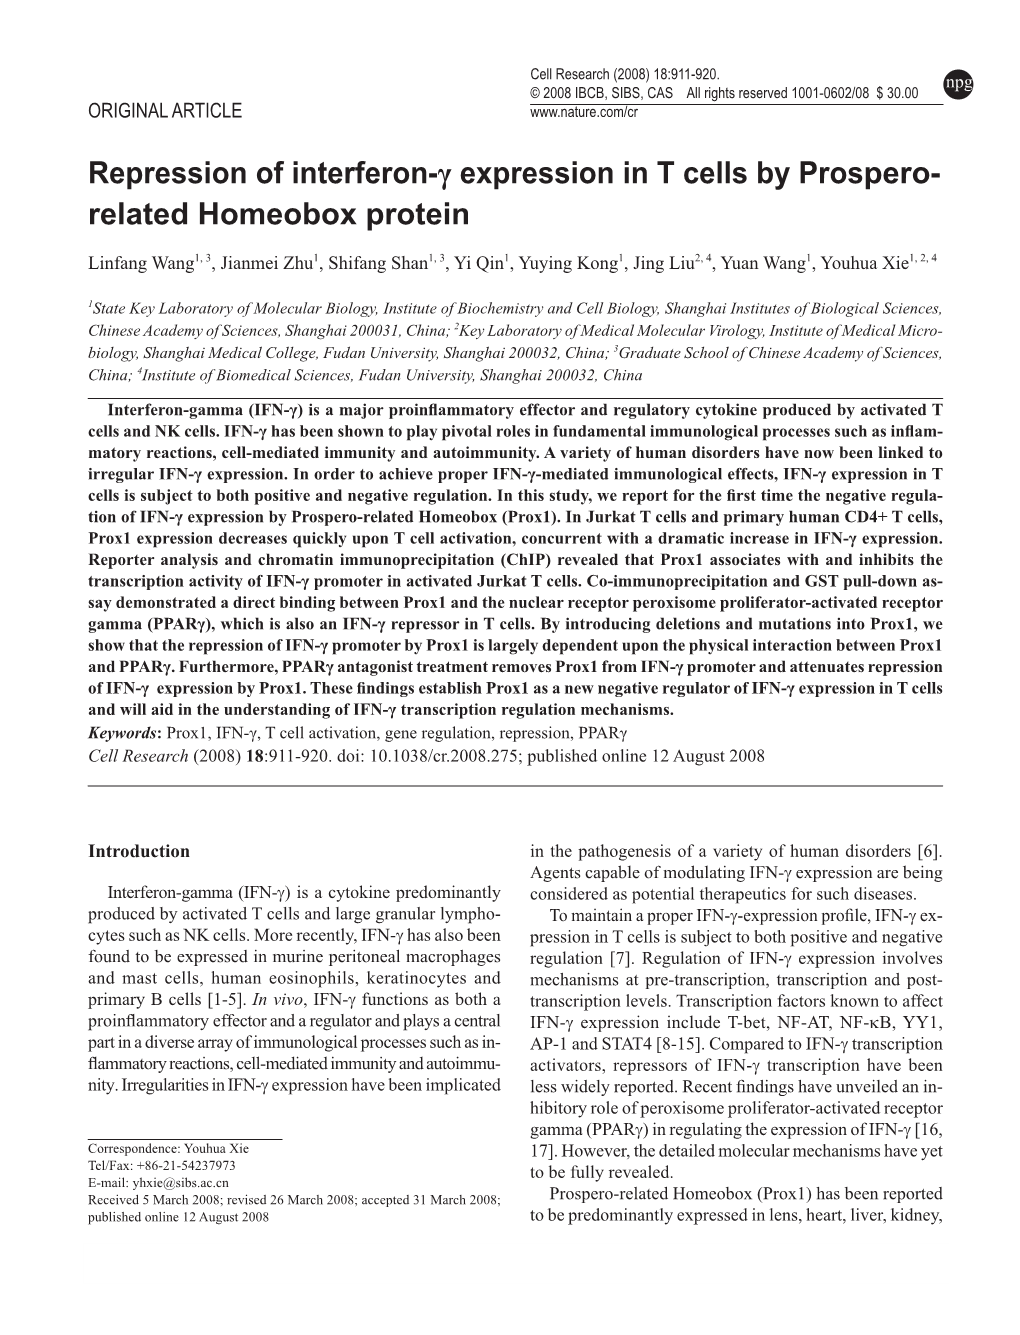 Repression of Interferon-Γ Expression in T Cells by Prospero- Related Homeobox Protein